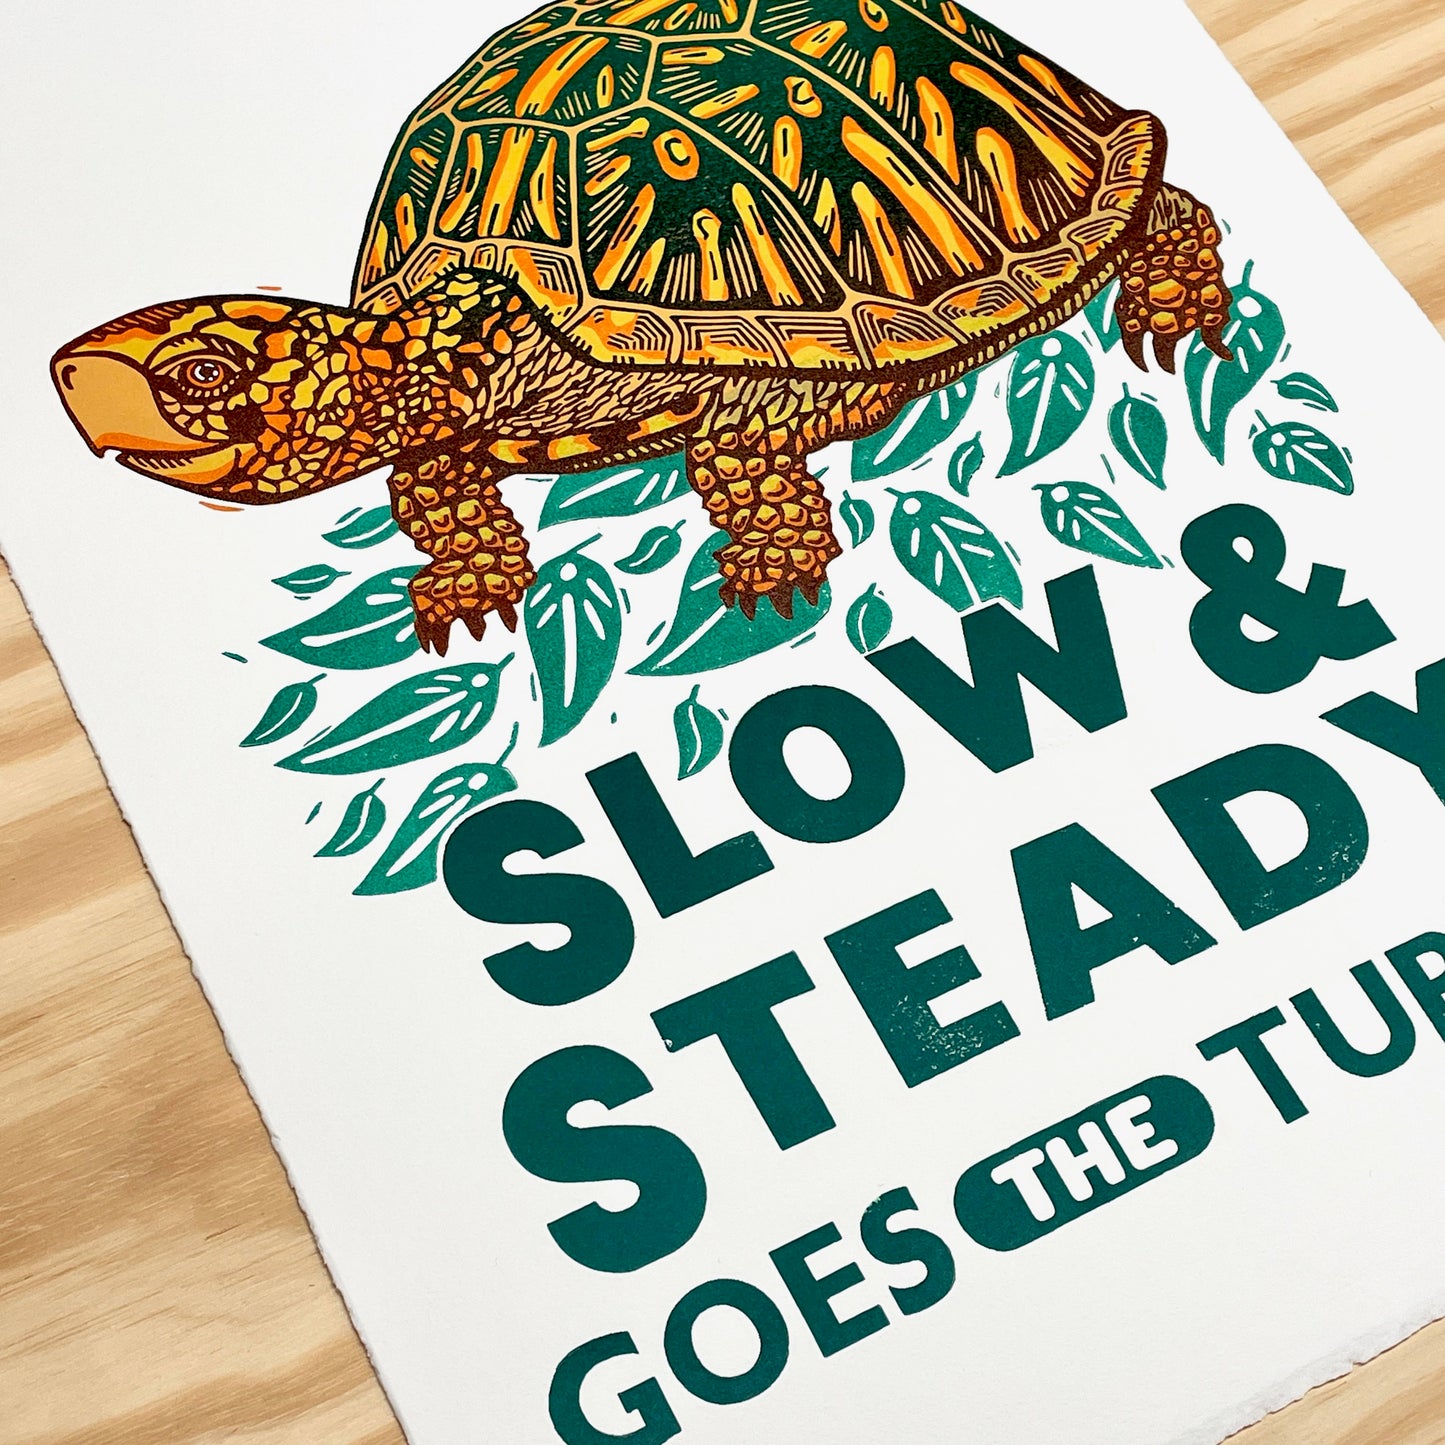 Slow & Steady Goes the Turtle - woodblock and letterpress print (14x18")